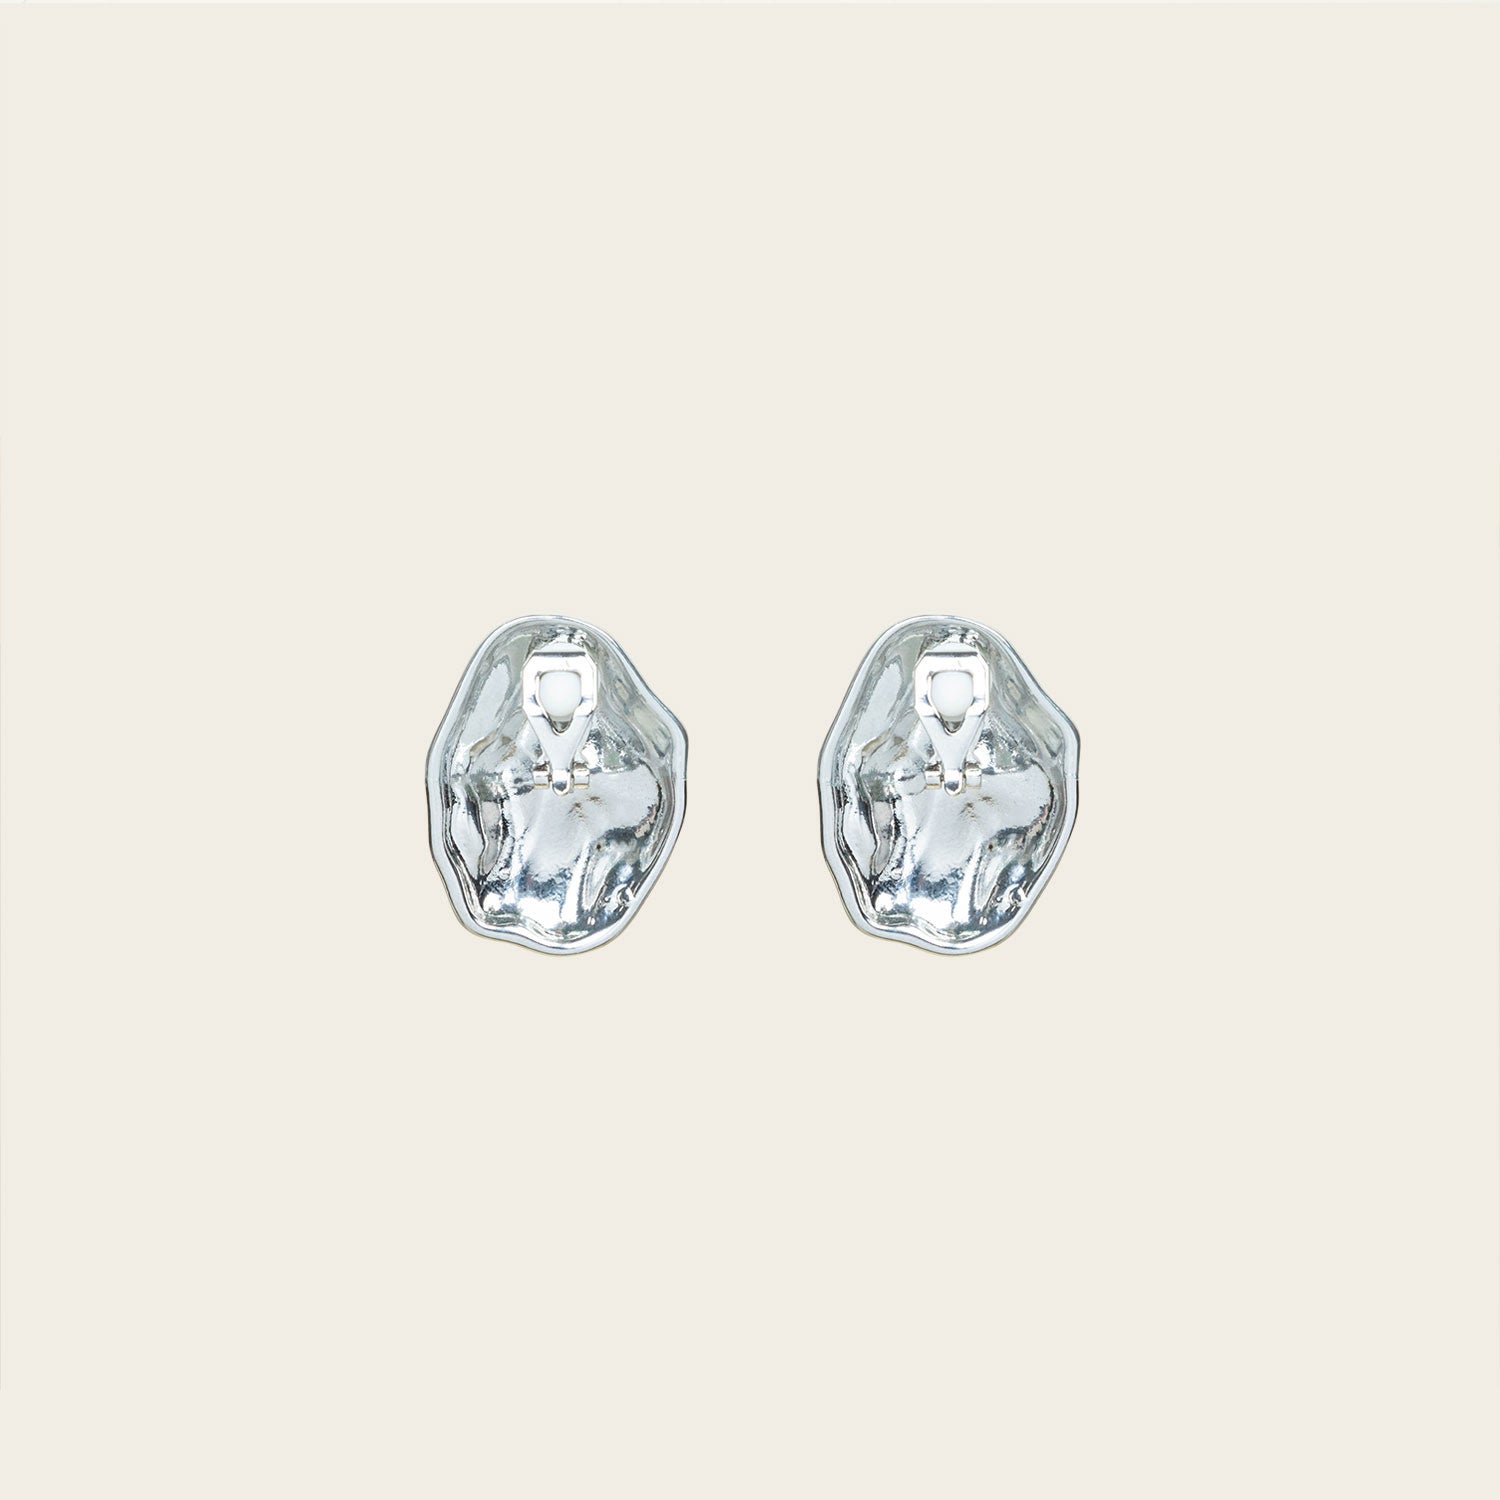 Image of the Amaya Clip On Earrings in Silver feature a secure padded clip-on closure type, making them suitable for all ear types.The average comfortable wear duration is 8-12 hours, and the Copper Alloy construction ensures a reliable and secure hold. The item is sold as one pair; adjustable rubber padding is included.